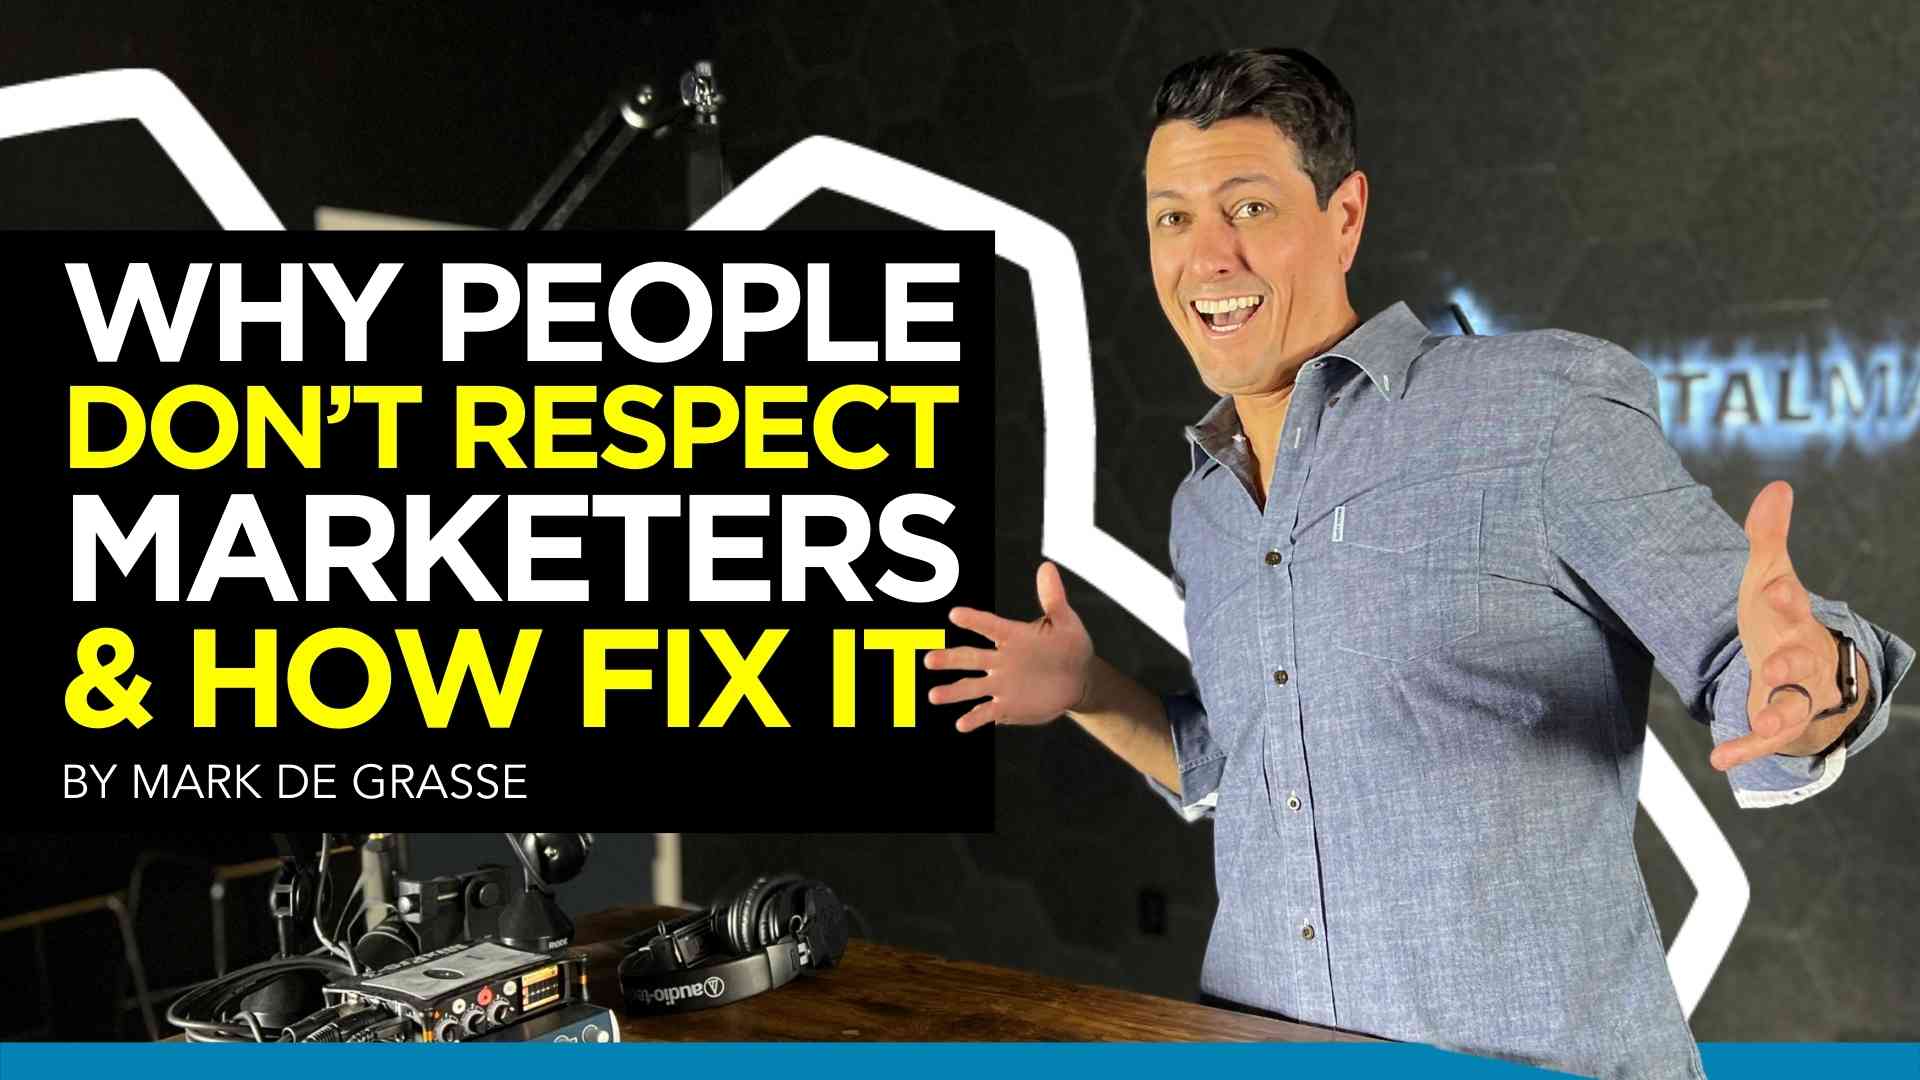 Why People Don't Respect Marketers & How to Elevate the Marketing Profession